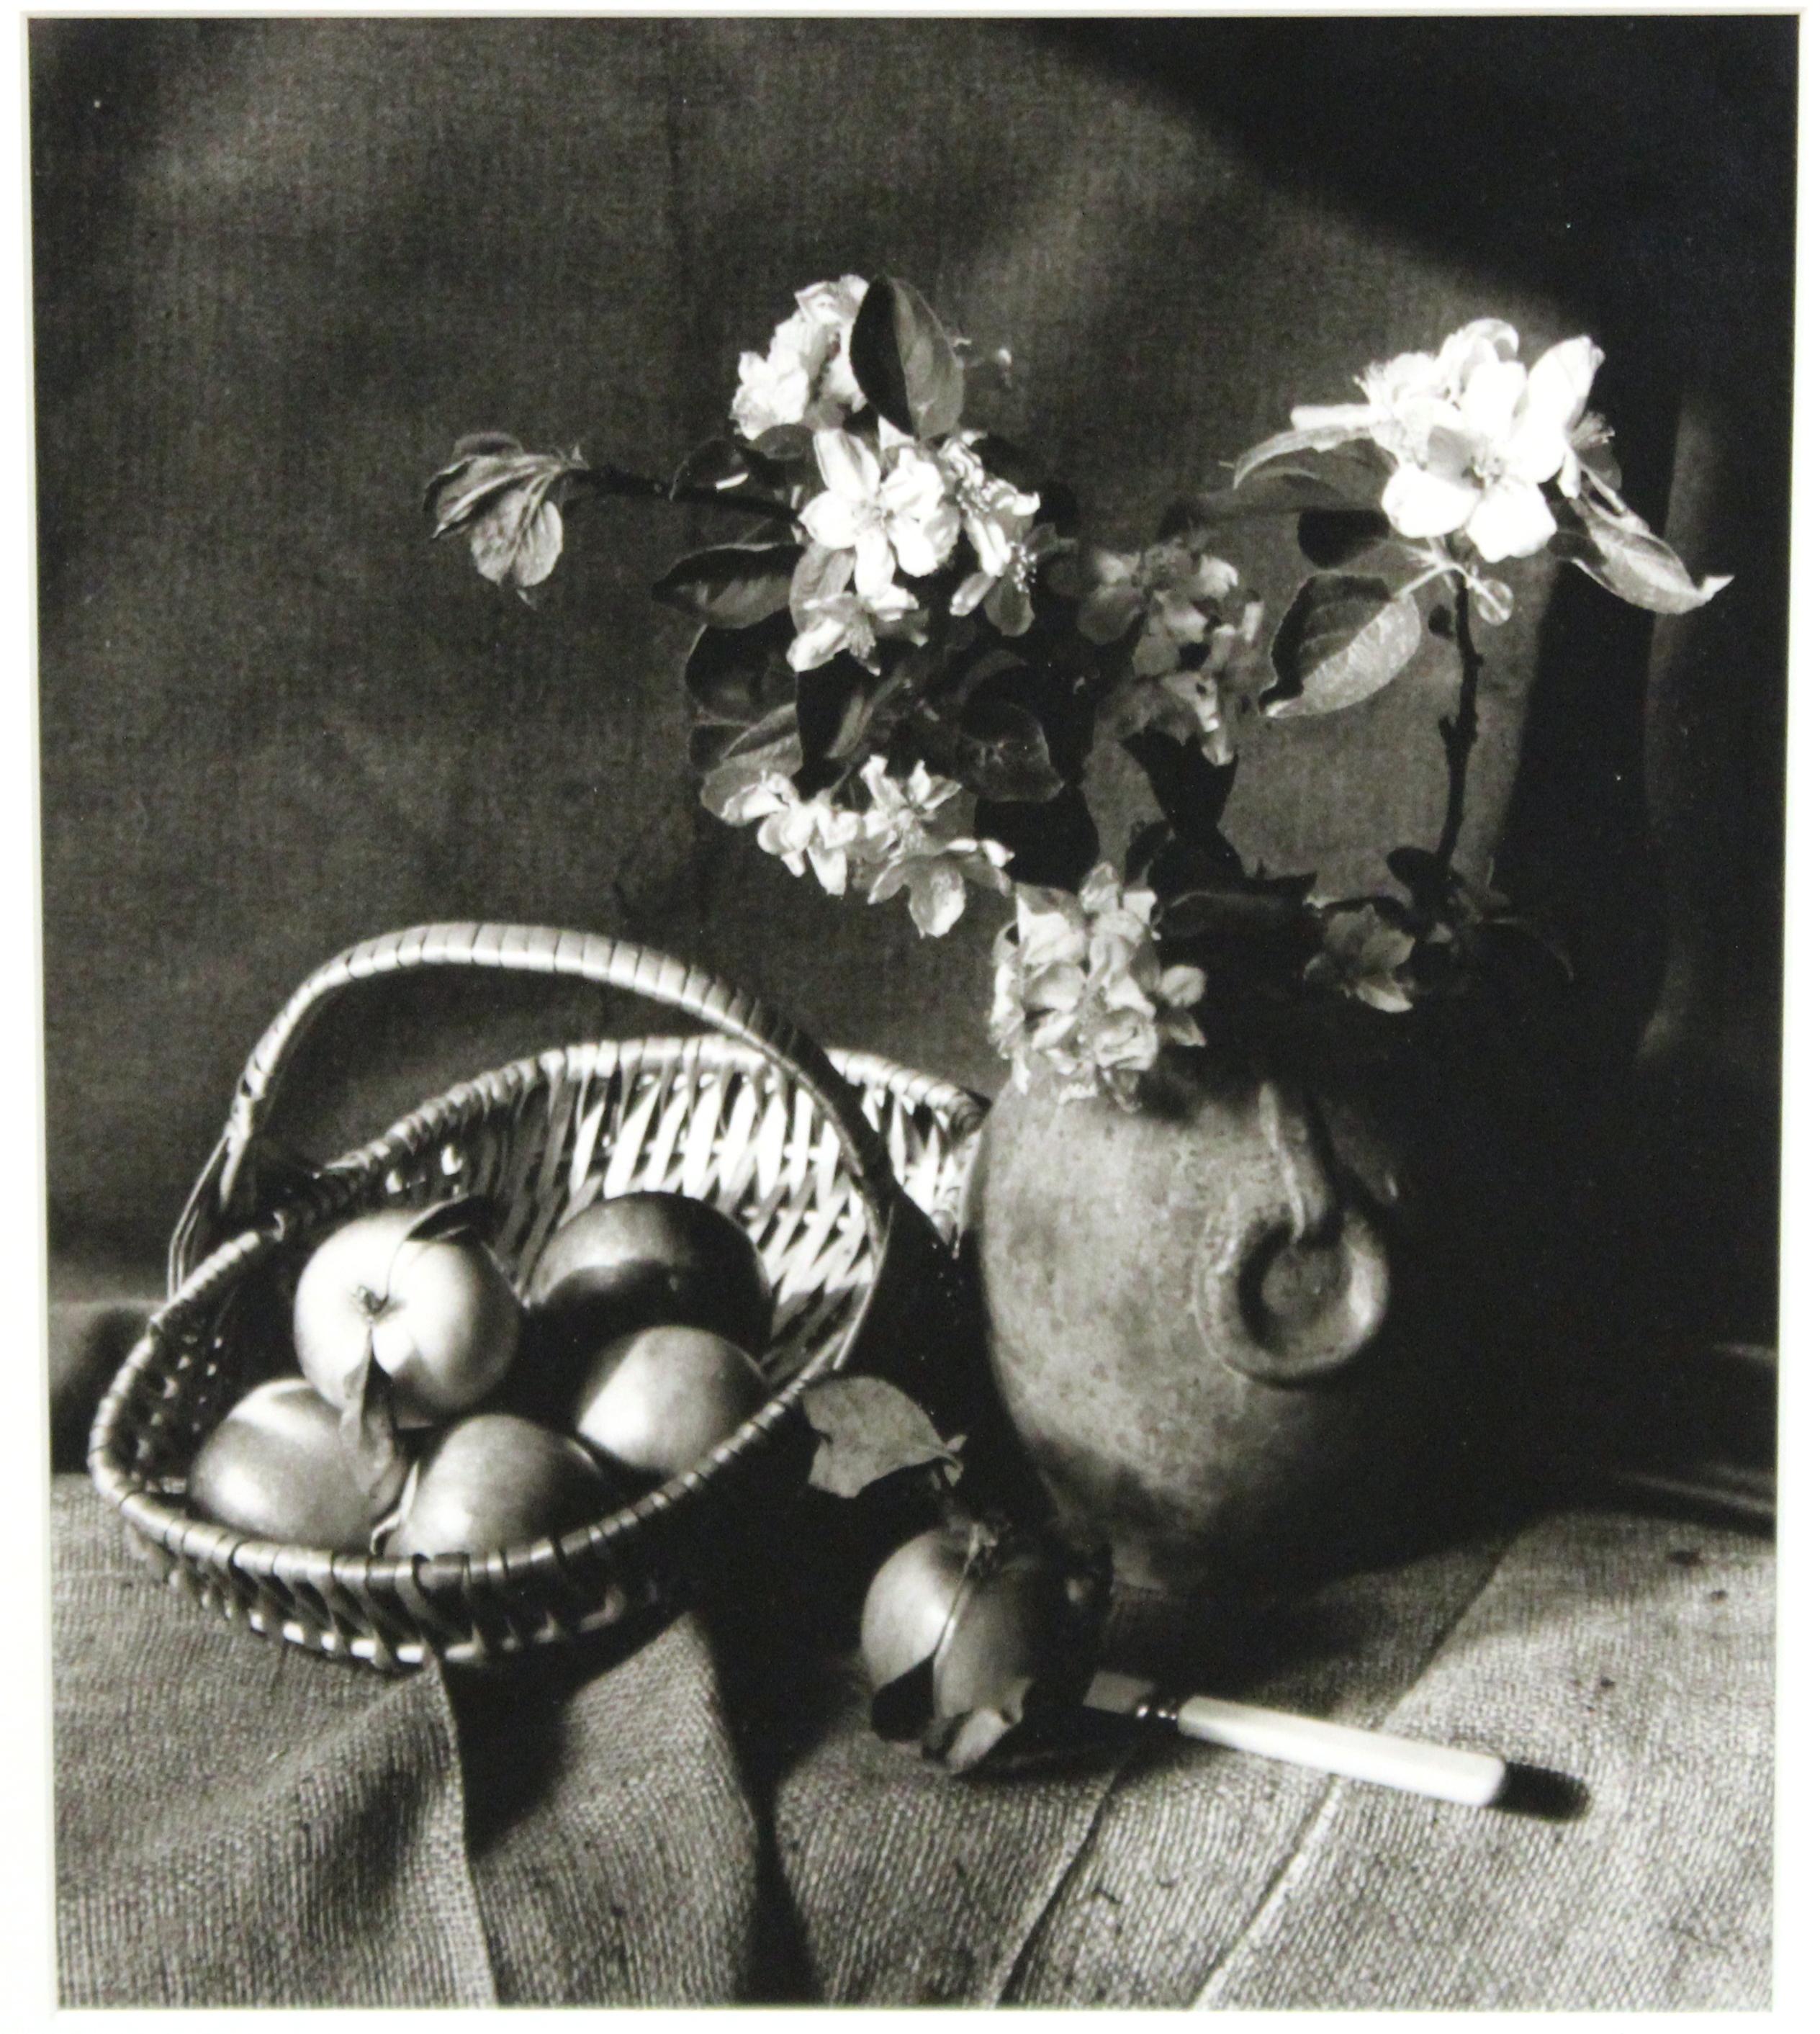 American modern still life photograph with plants and fruit bowl, by Bo Kass. Kass's work appears in the collections of the Connecticut Historical Society, Baruch College, The City University of New York among others. Signed by the artist on the